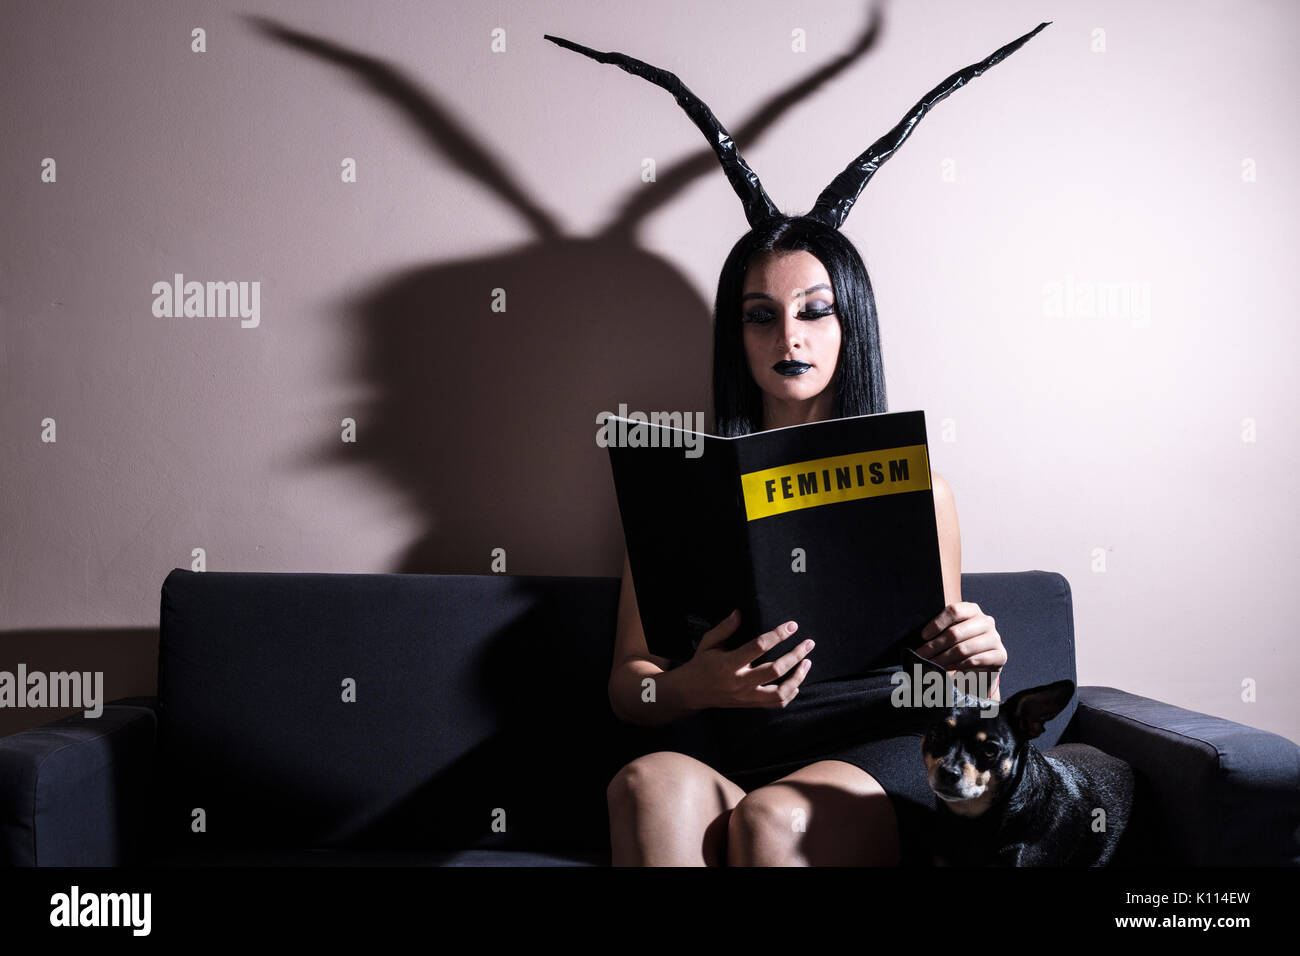 Feminist portrayed as a daemon on a couch Stock Photo